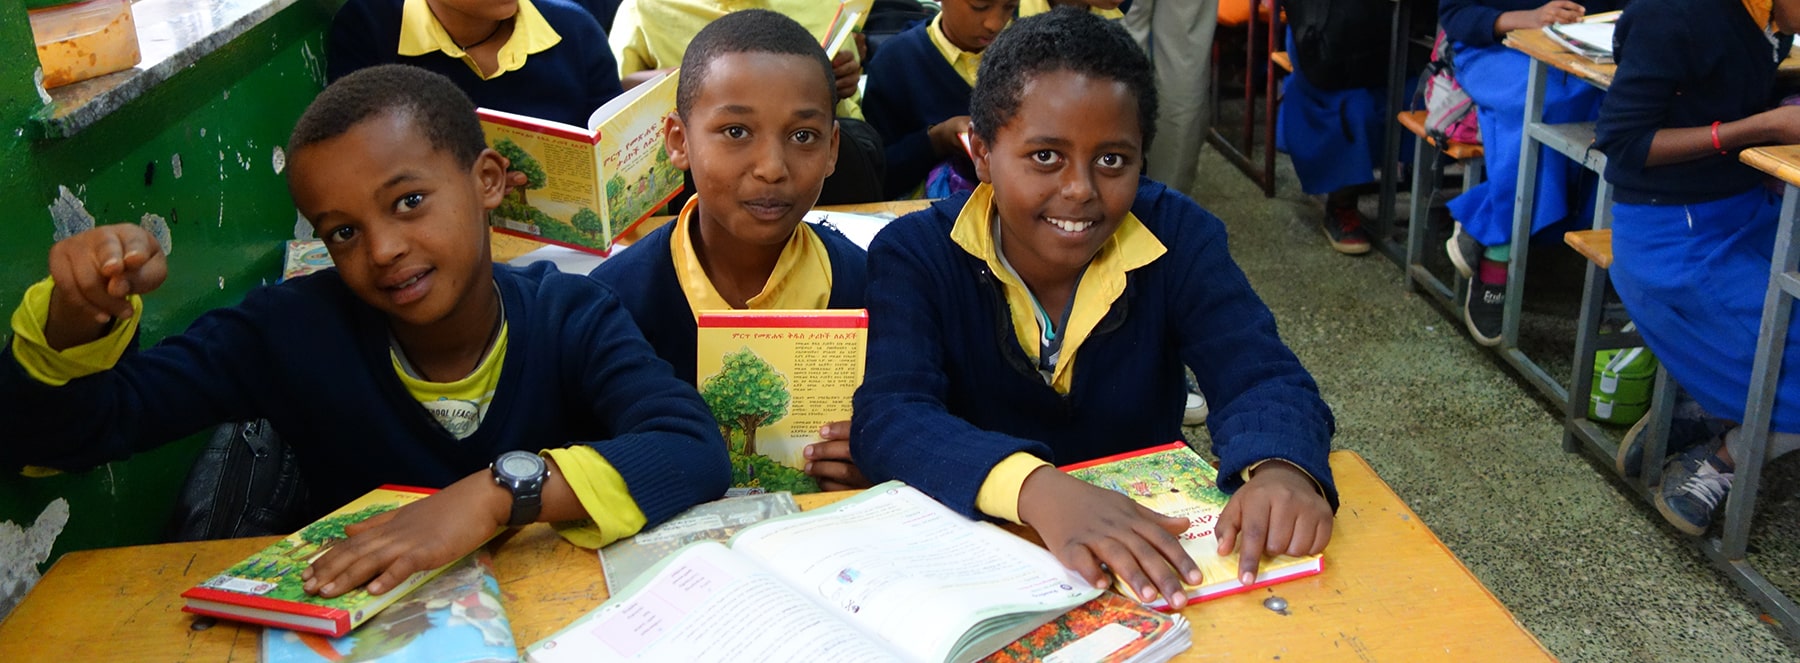 Ethiopia School Boys With A Child's Garden of Bible Storybooks